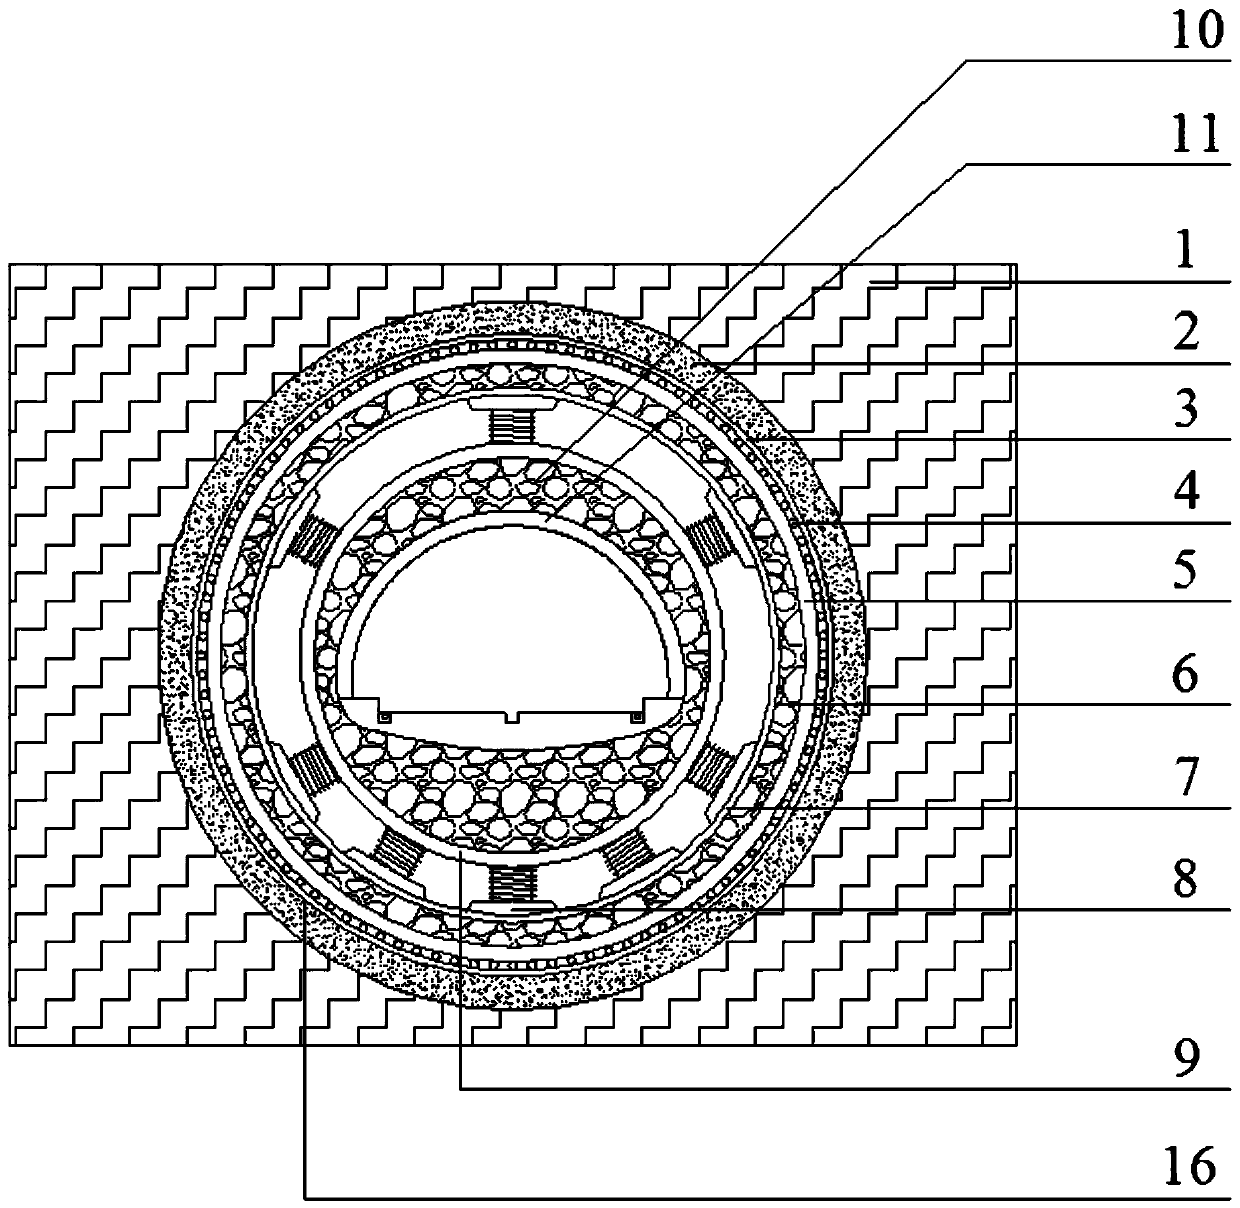 Tunnel flexible ring type supporting system suitable for passing through movable fault zone